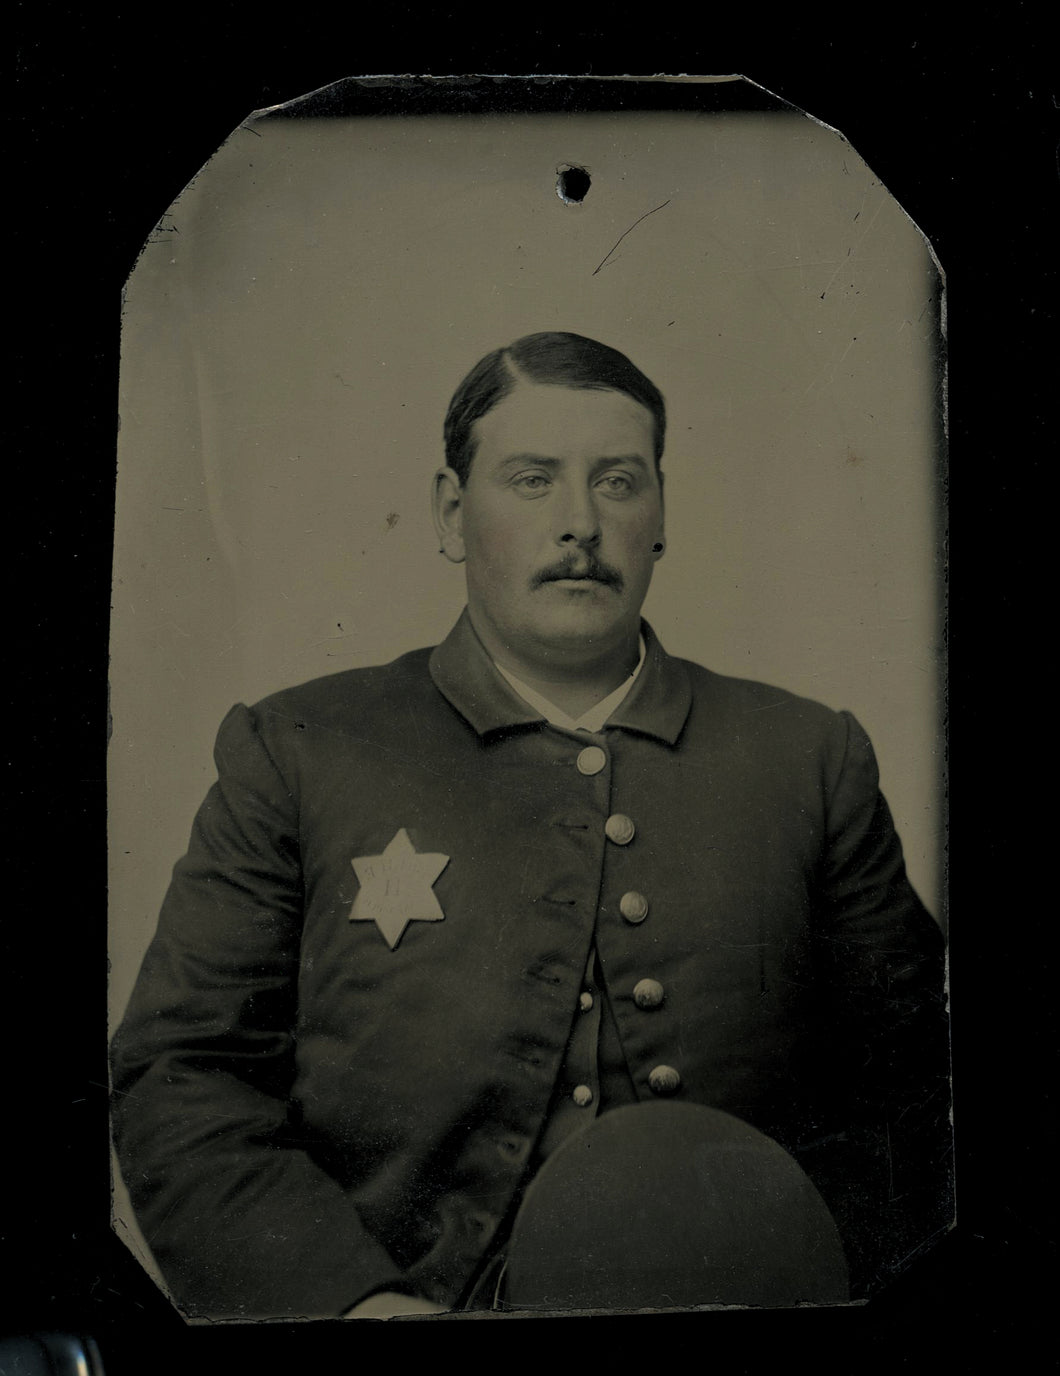 Antique Police Officer Tintype Star Badge Original 1800s 1870s Photograph